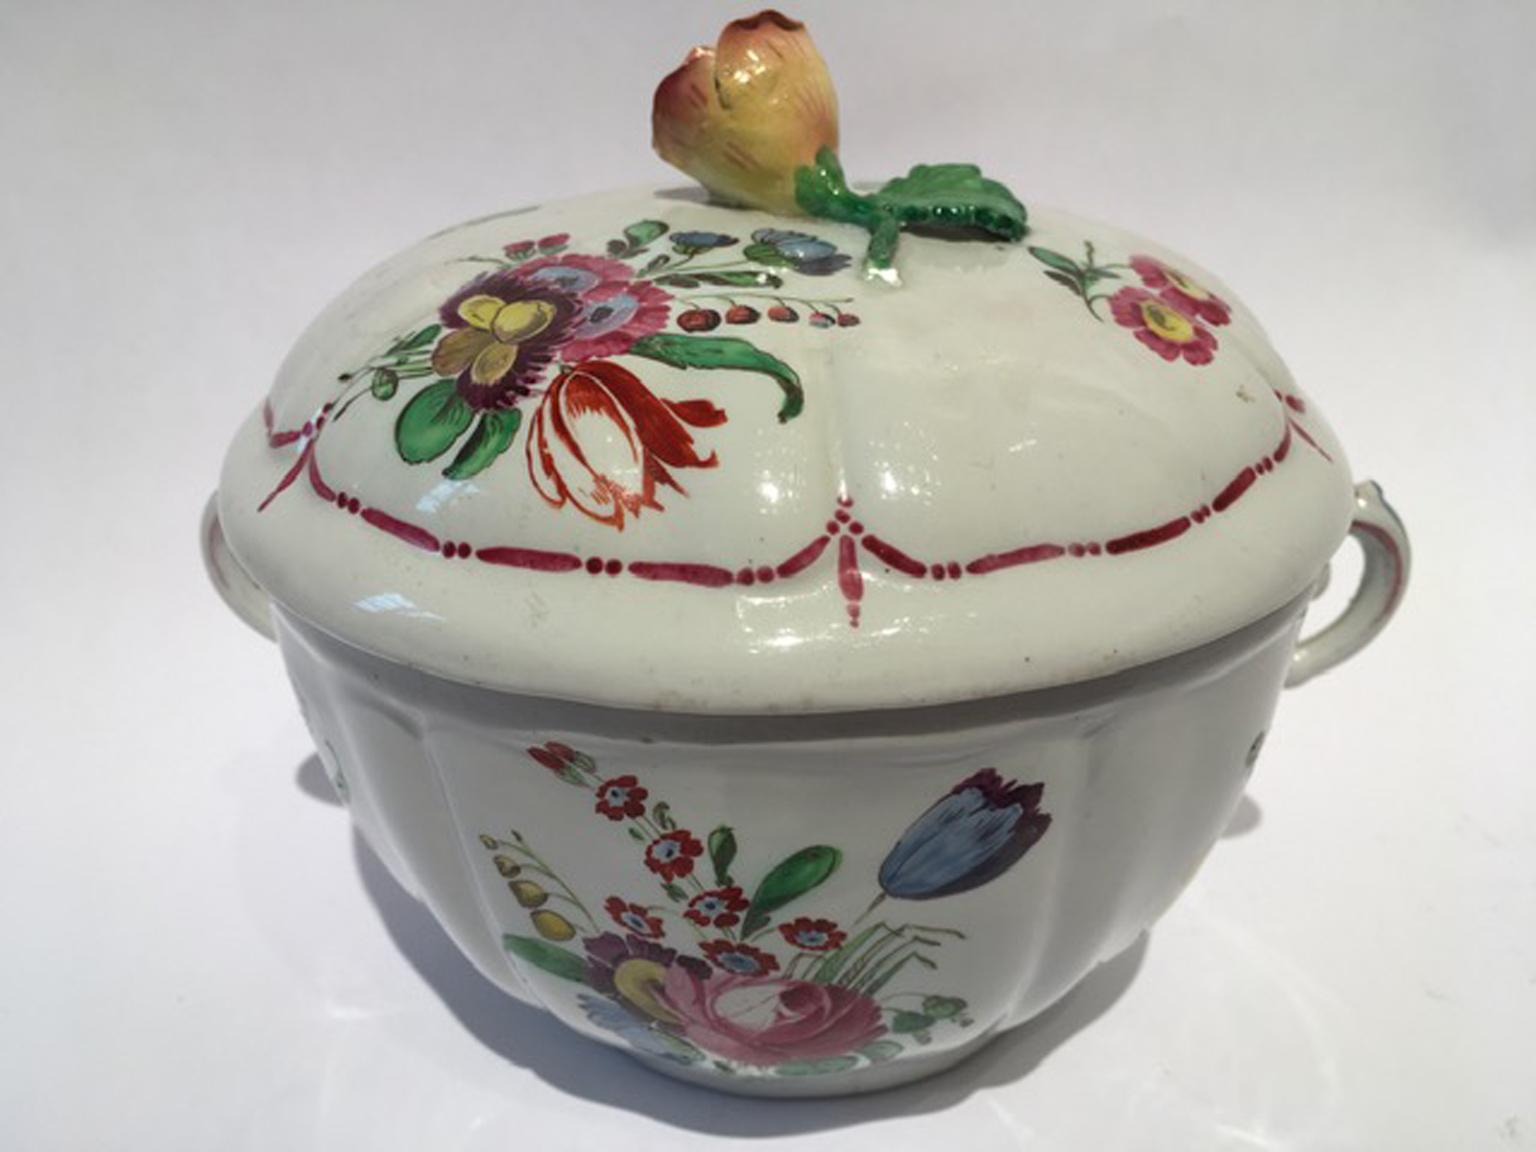 Italy 18th Century Richard Ginori Porcelain Covered Cup or Sugar Bowl For Sale 5